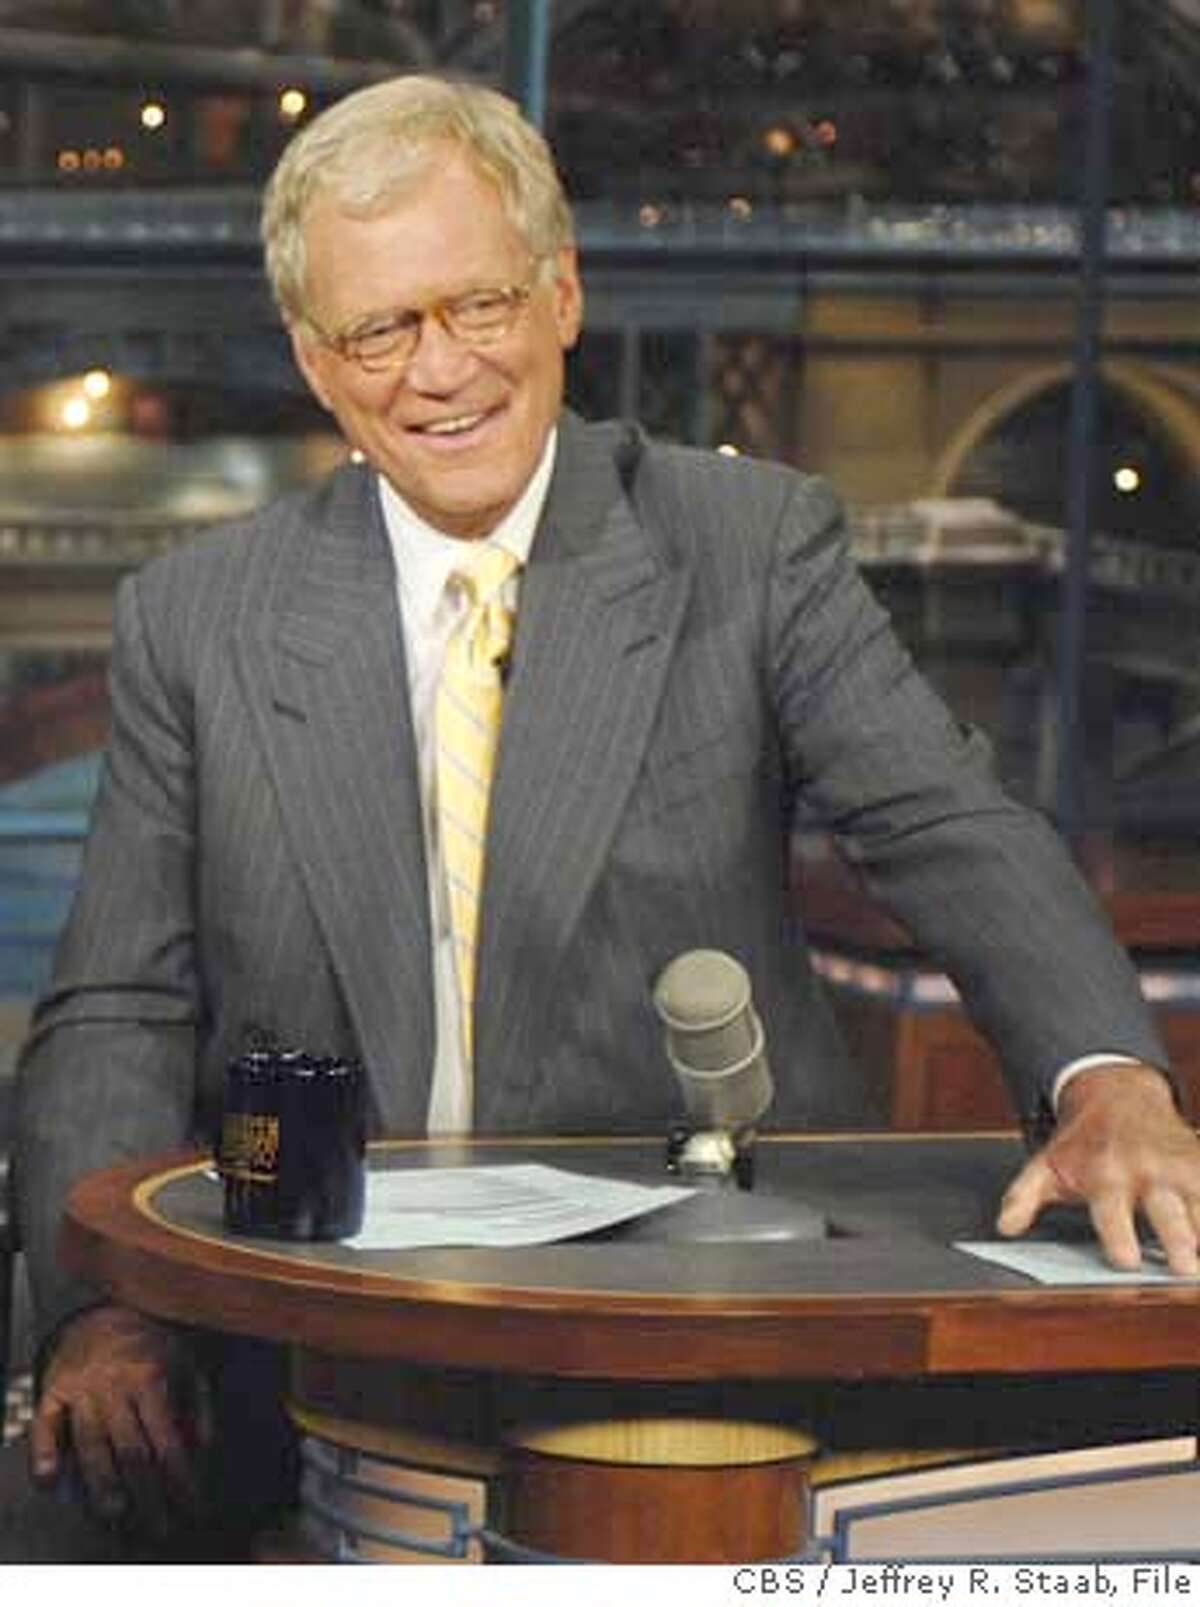 ** FILE ** This file photo released by CBS, shows David Letterman during taping of "The Late Show," Sept. 4, 2007 in New York. (AP Photo/CBS, Jeffrey R. Staab, File) **MANDATORY CREDIT, NO SALES, NO ARCHIVE, NORTH AMERICAN USE ONLY** Ran on: 12-31-2007 No Top Ten? David Letterman. HANDOUT PHOTO PROVIDED BY CBS, MANDATORY CREDIT; NO ARCHIVE; NO SALES; FOR NORTH AMERICAN USE ONLY, SEPT. 4, 2007 FILE PHOTO